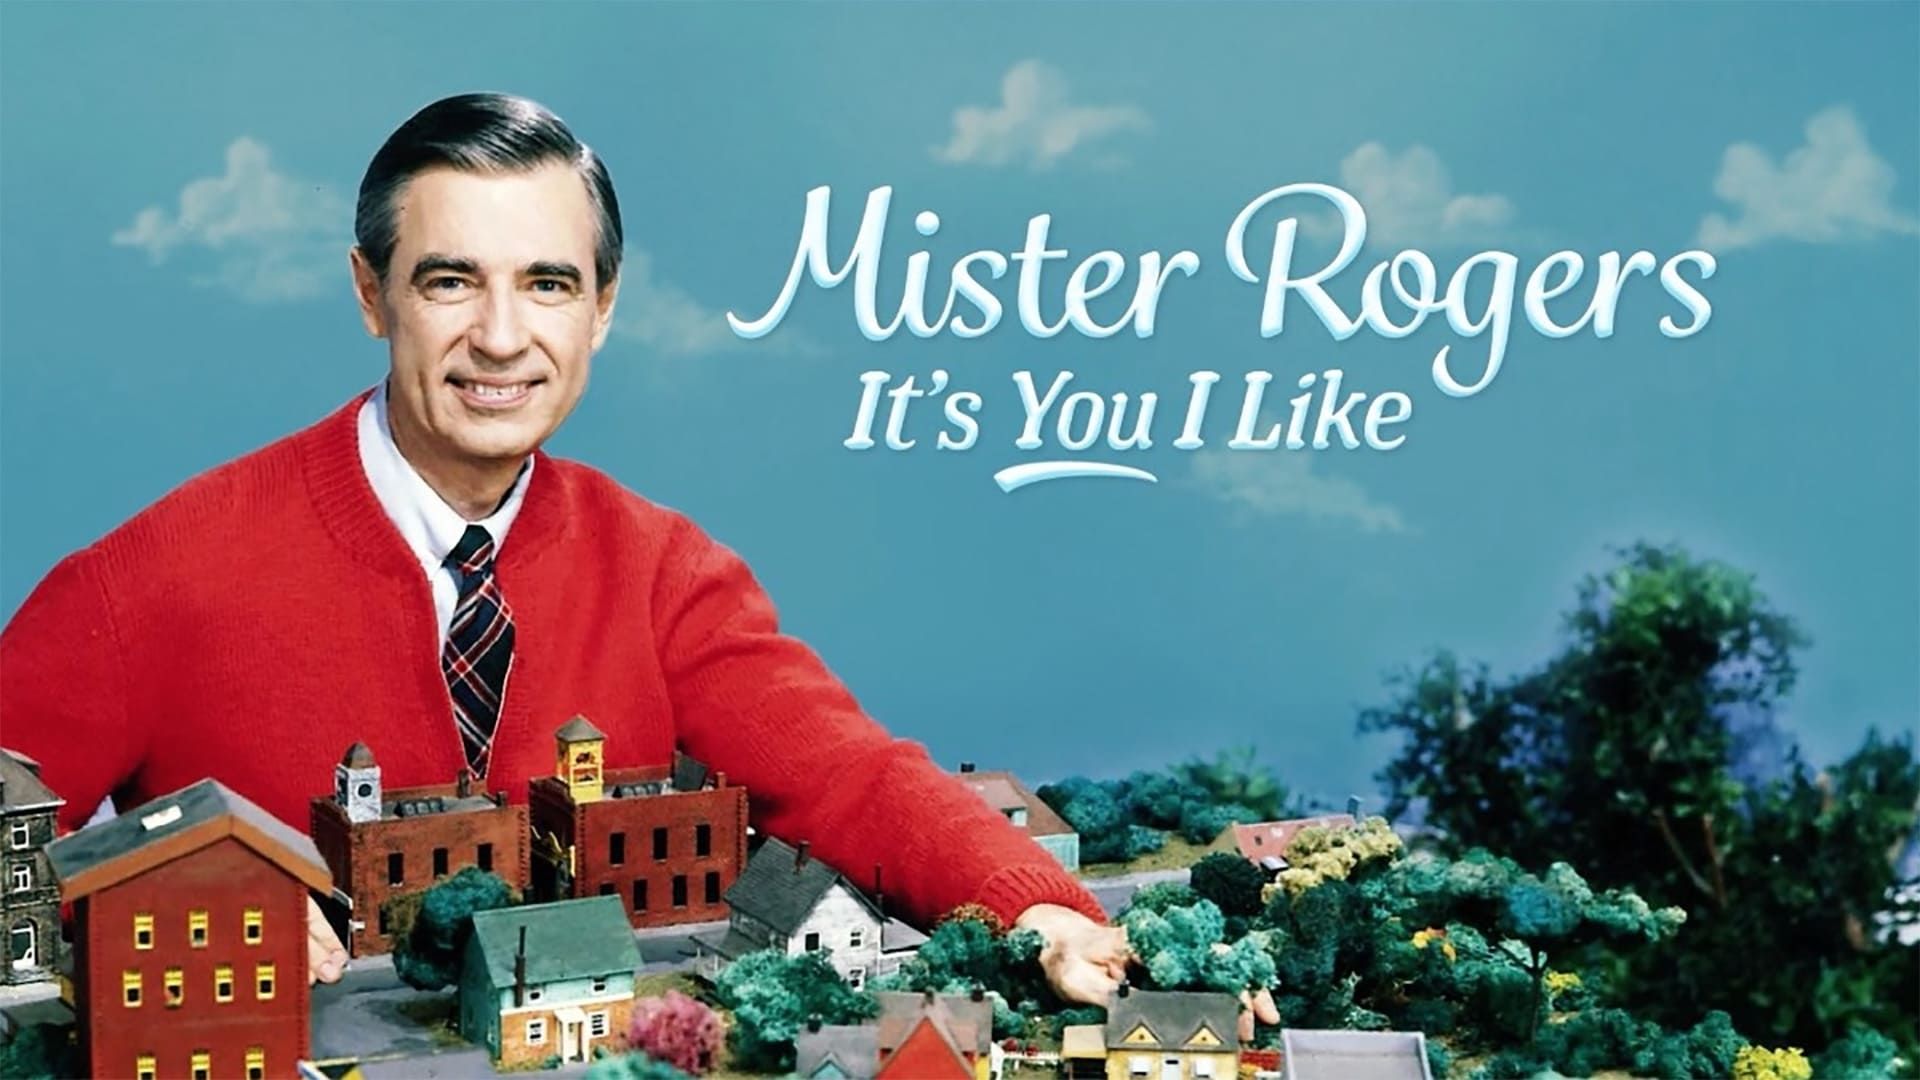 Mister Rogers: It's You I Like background